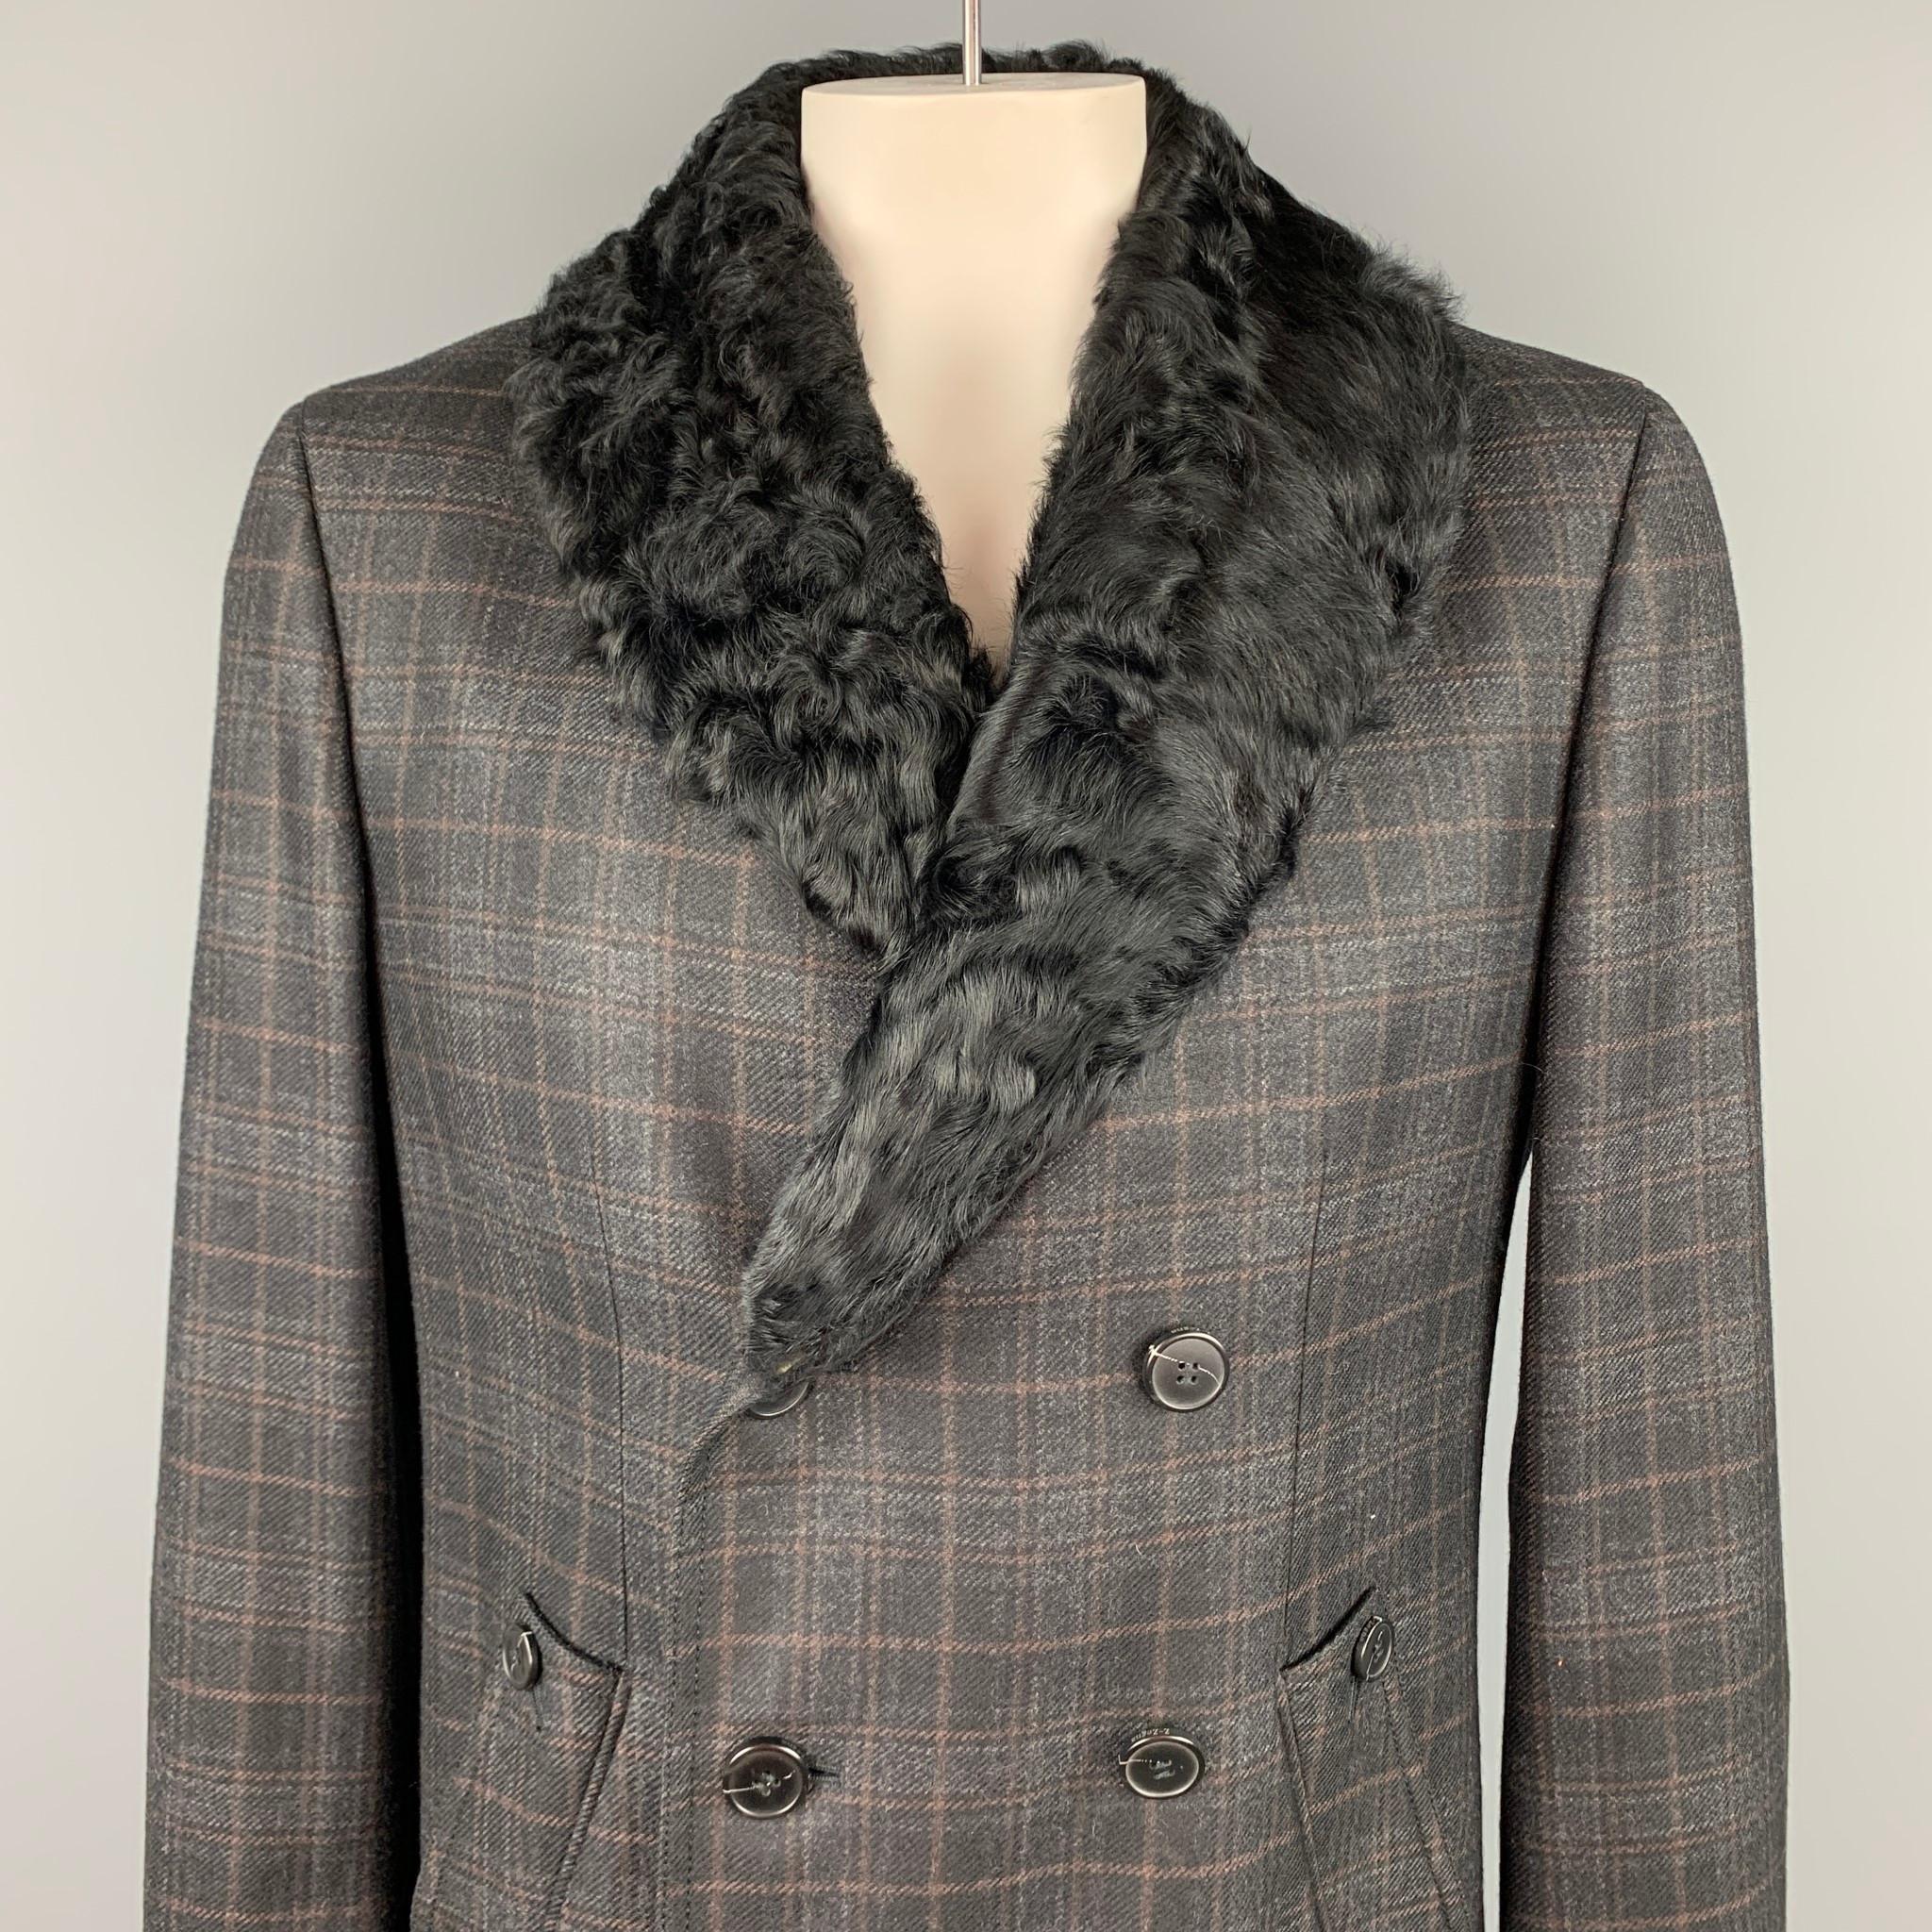 Z ZEGNA coat comes in a charcoal plaid wool with a full liner featuring a fur collar, slit pockets, and a double breasted closure.

Very Good Pre-Owned Condition.
Marked: 52 L

Measurements:

Shoulder: 19 in.
Chest: 42 in.
Sleeve: 29 in.
Length: